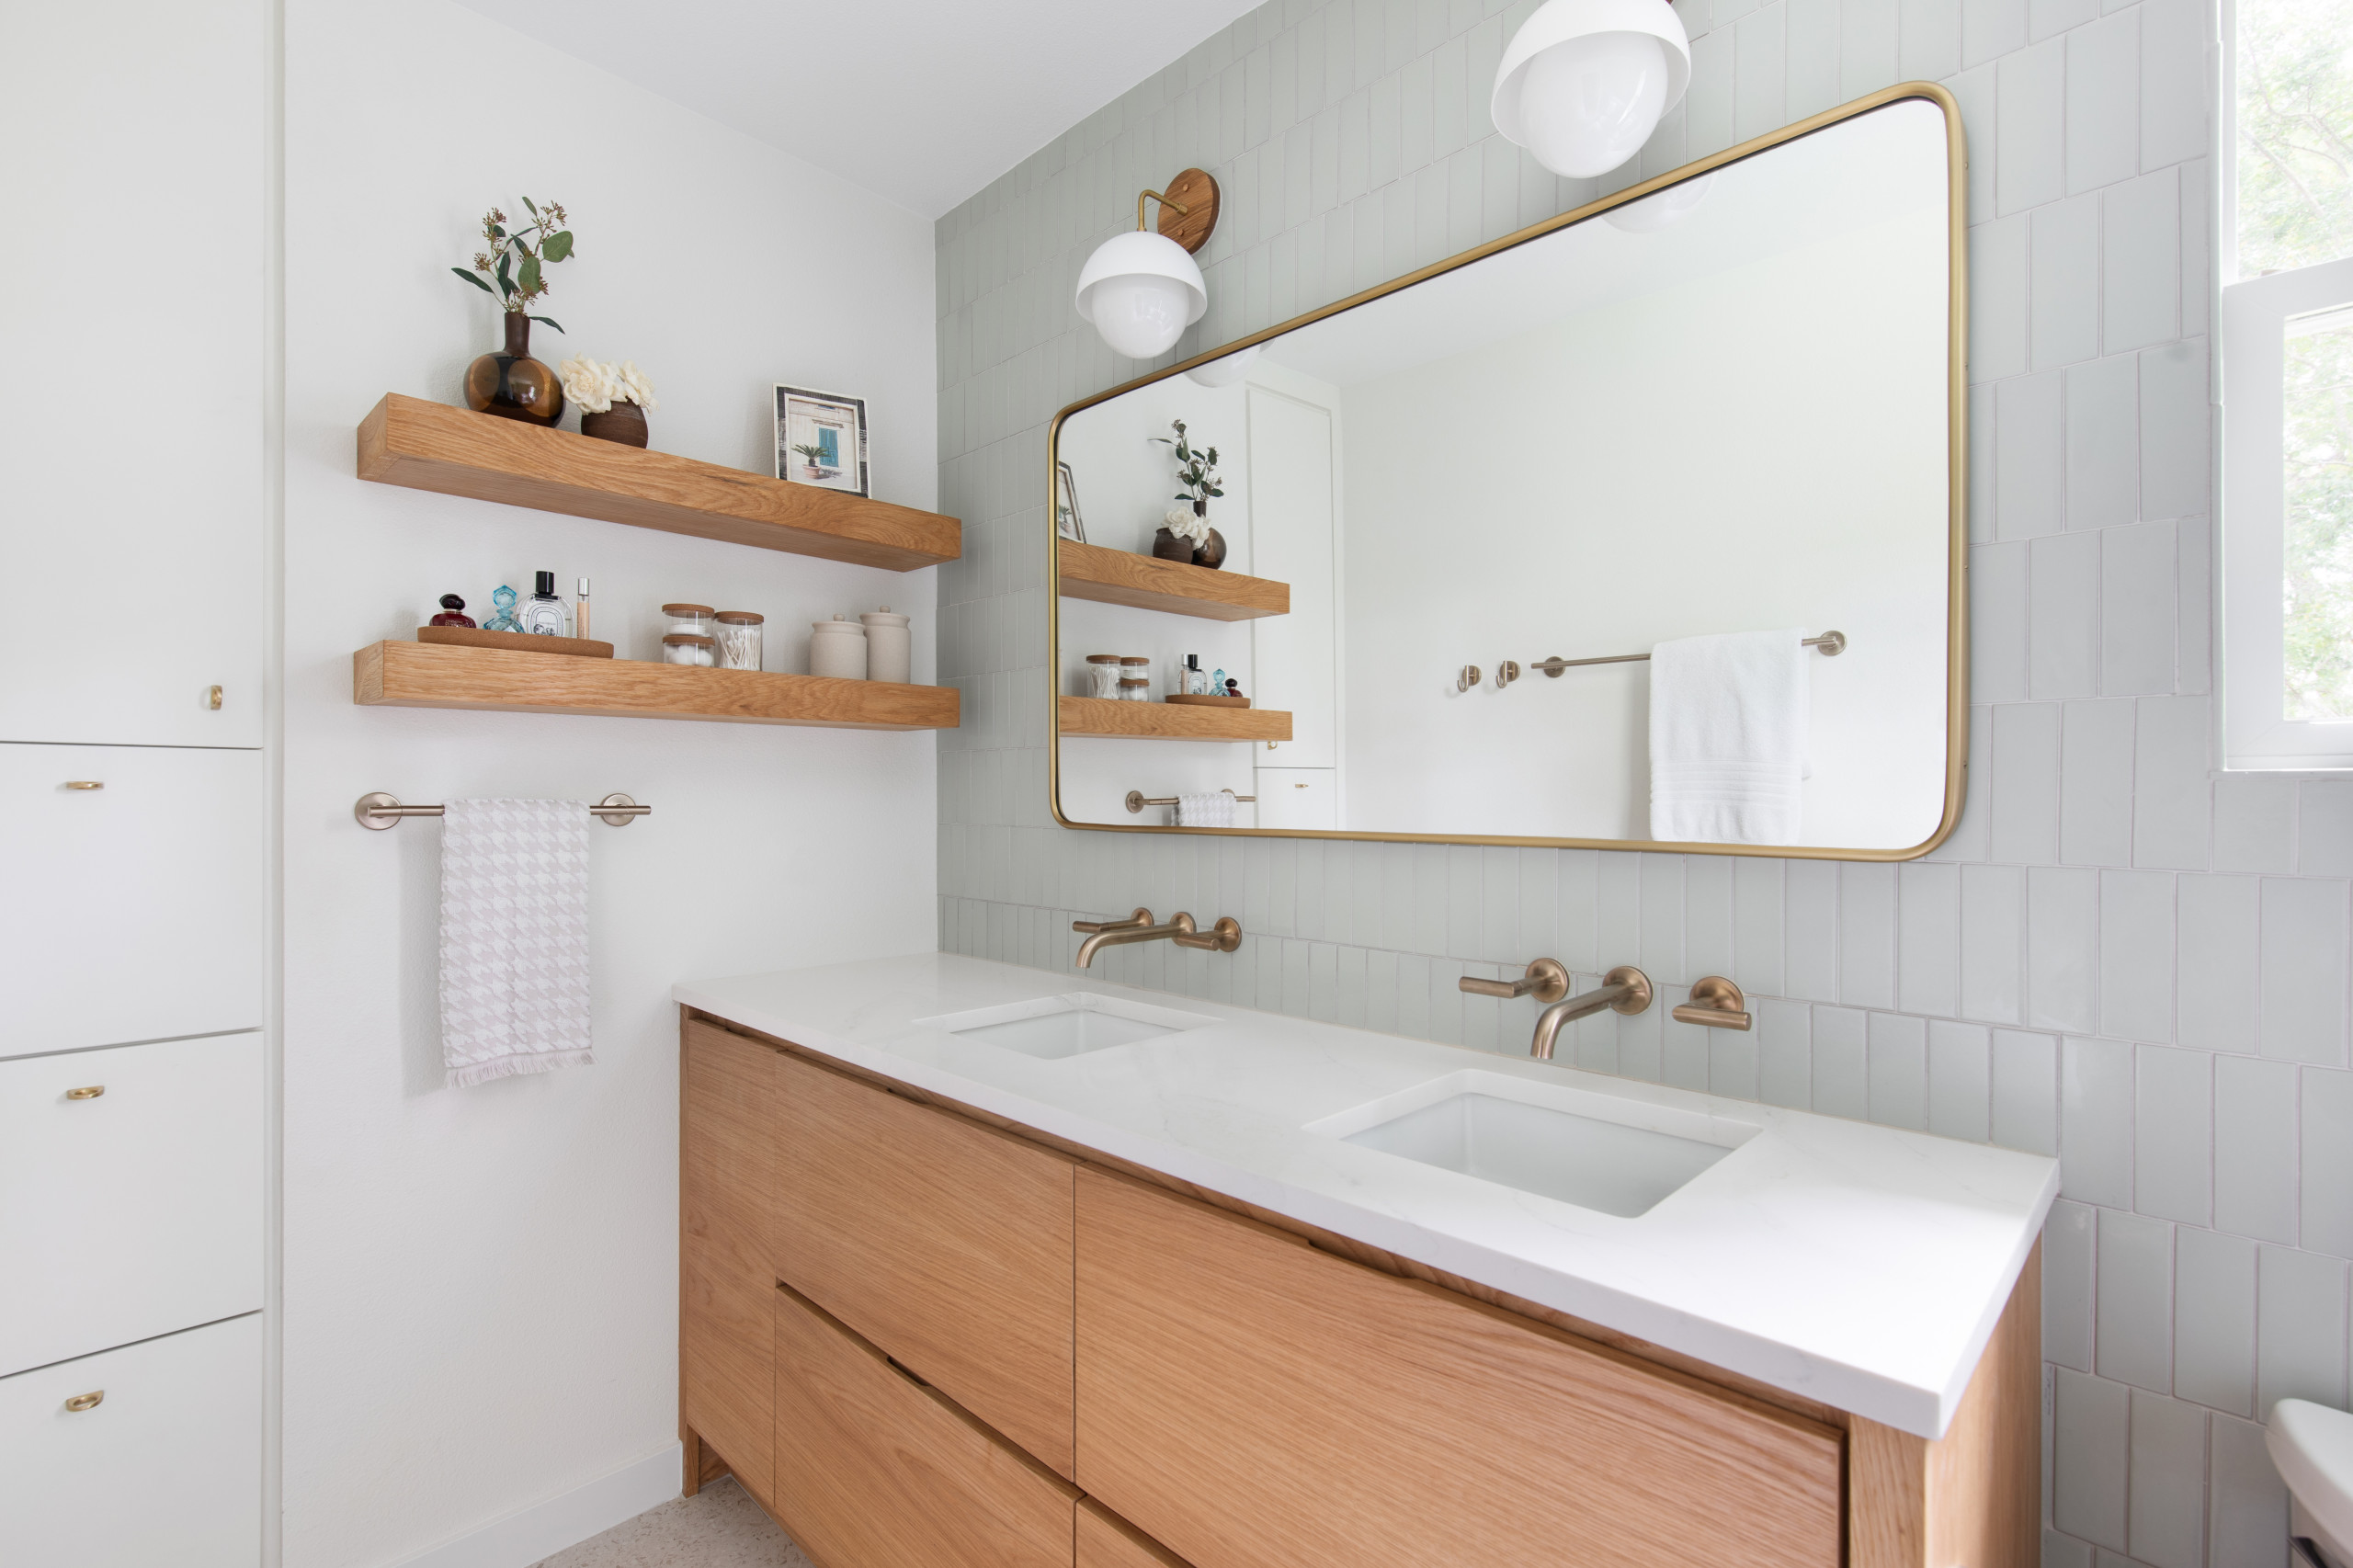 Why Designers Hate Most Medicine Cabinets (+ Some Genius